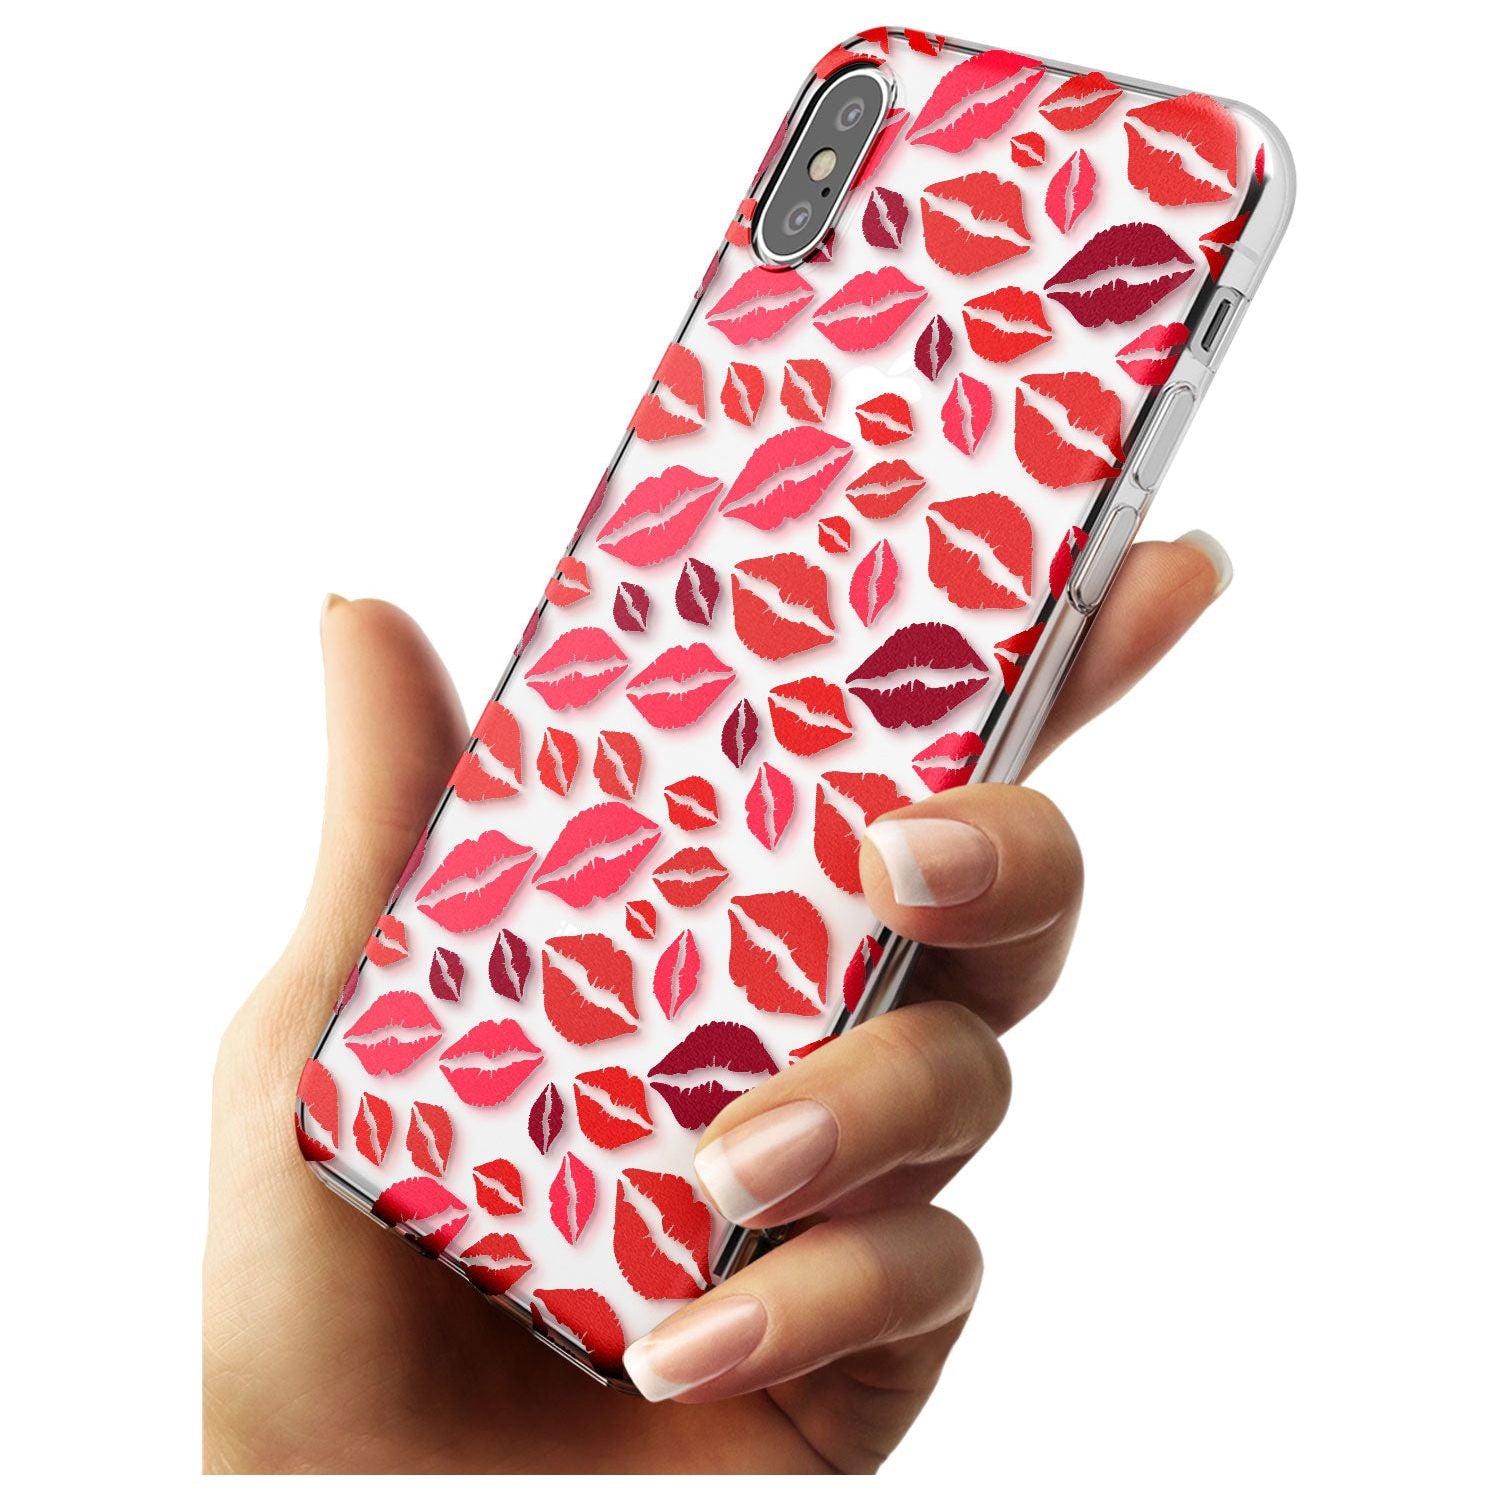 Lips Pattern Black Impact Phone Case for iPhone X XS Max XR